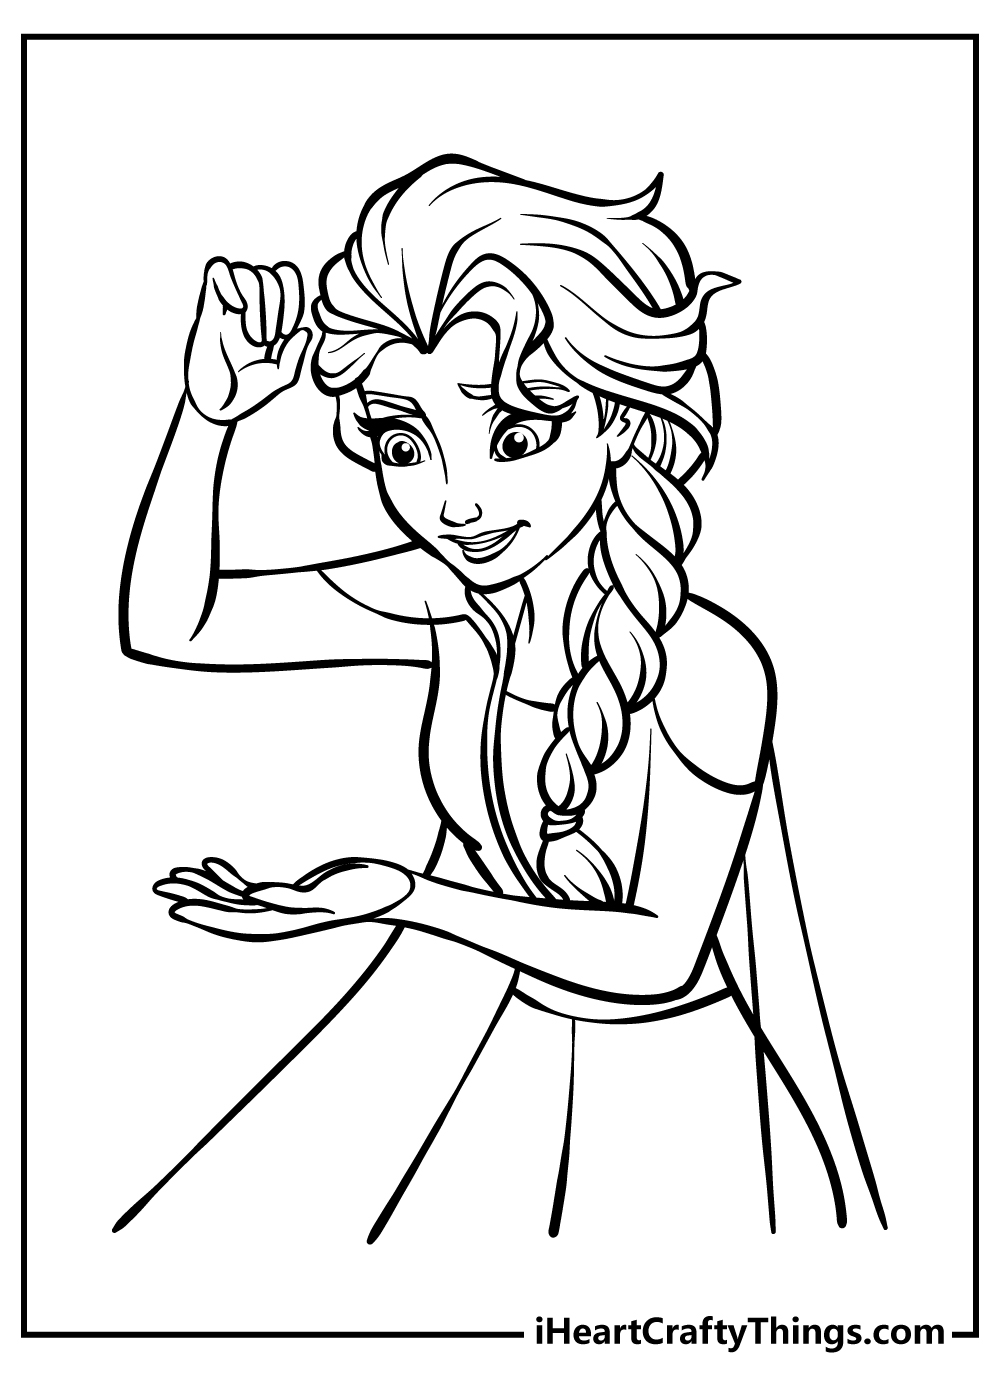 Printable Elsa Coloring Pages Updated 25